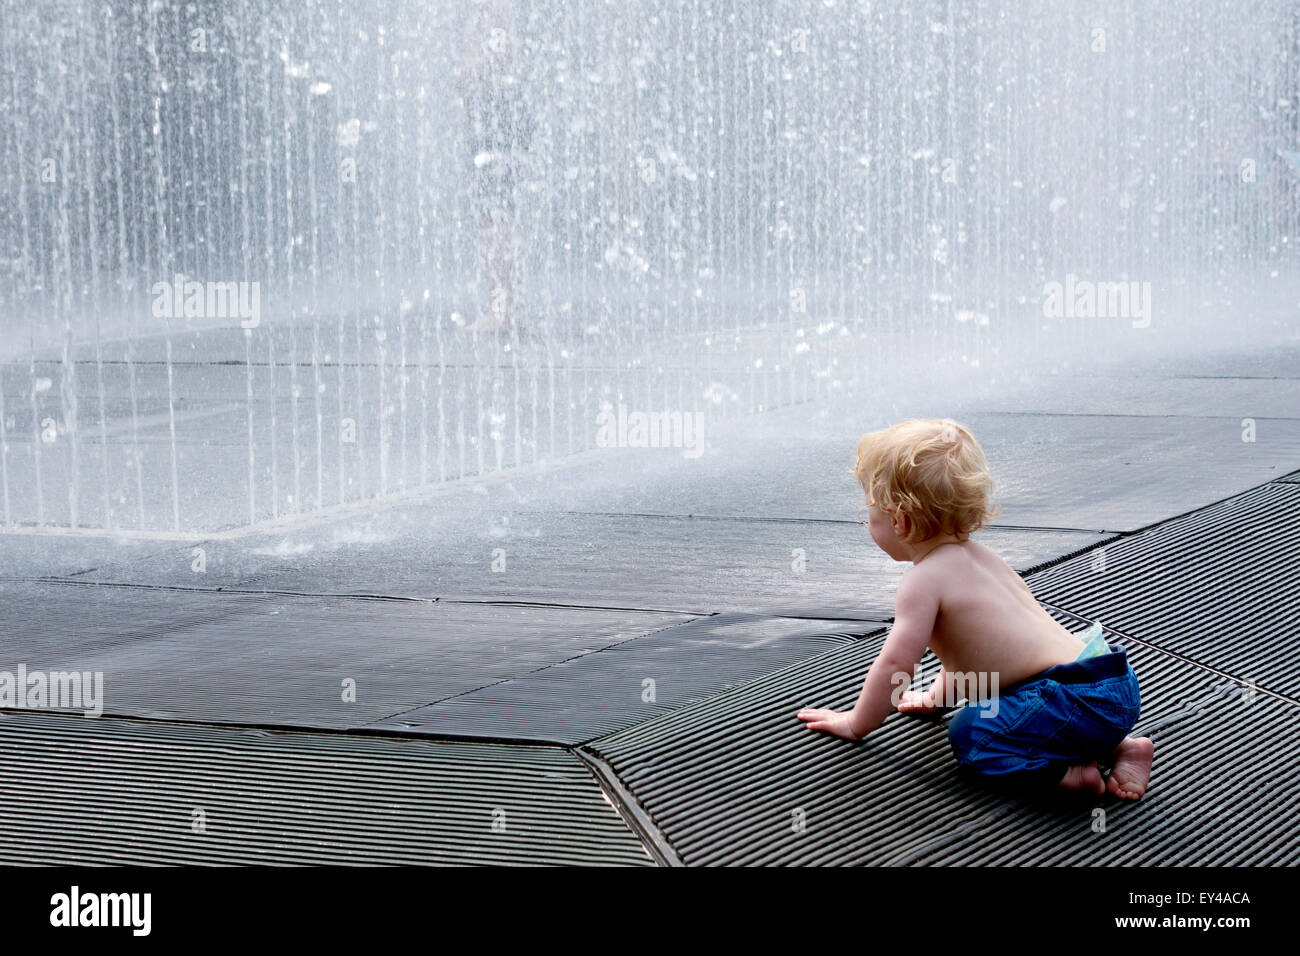 baby looking at a fountain on a hot afternoon, Concept - childhood discovery awe South Bank, London UK Stock Photo